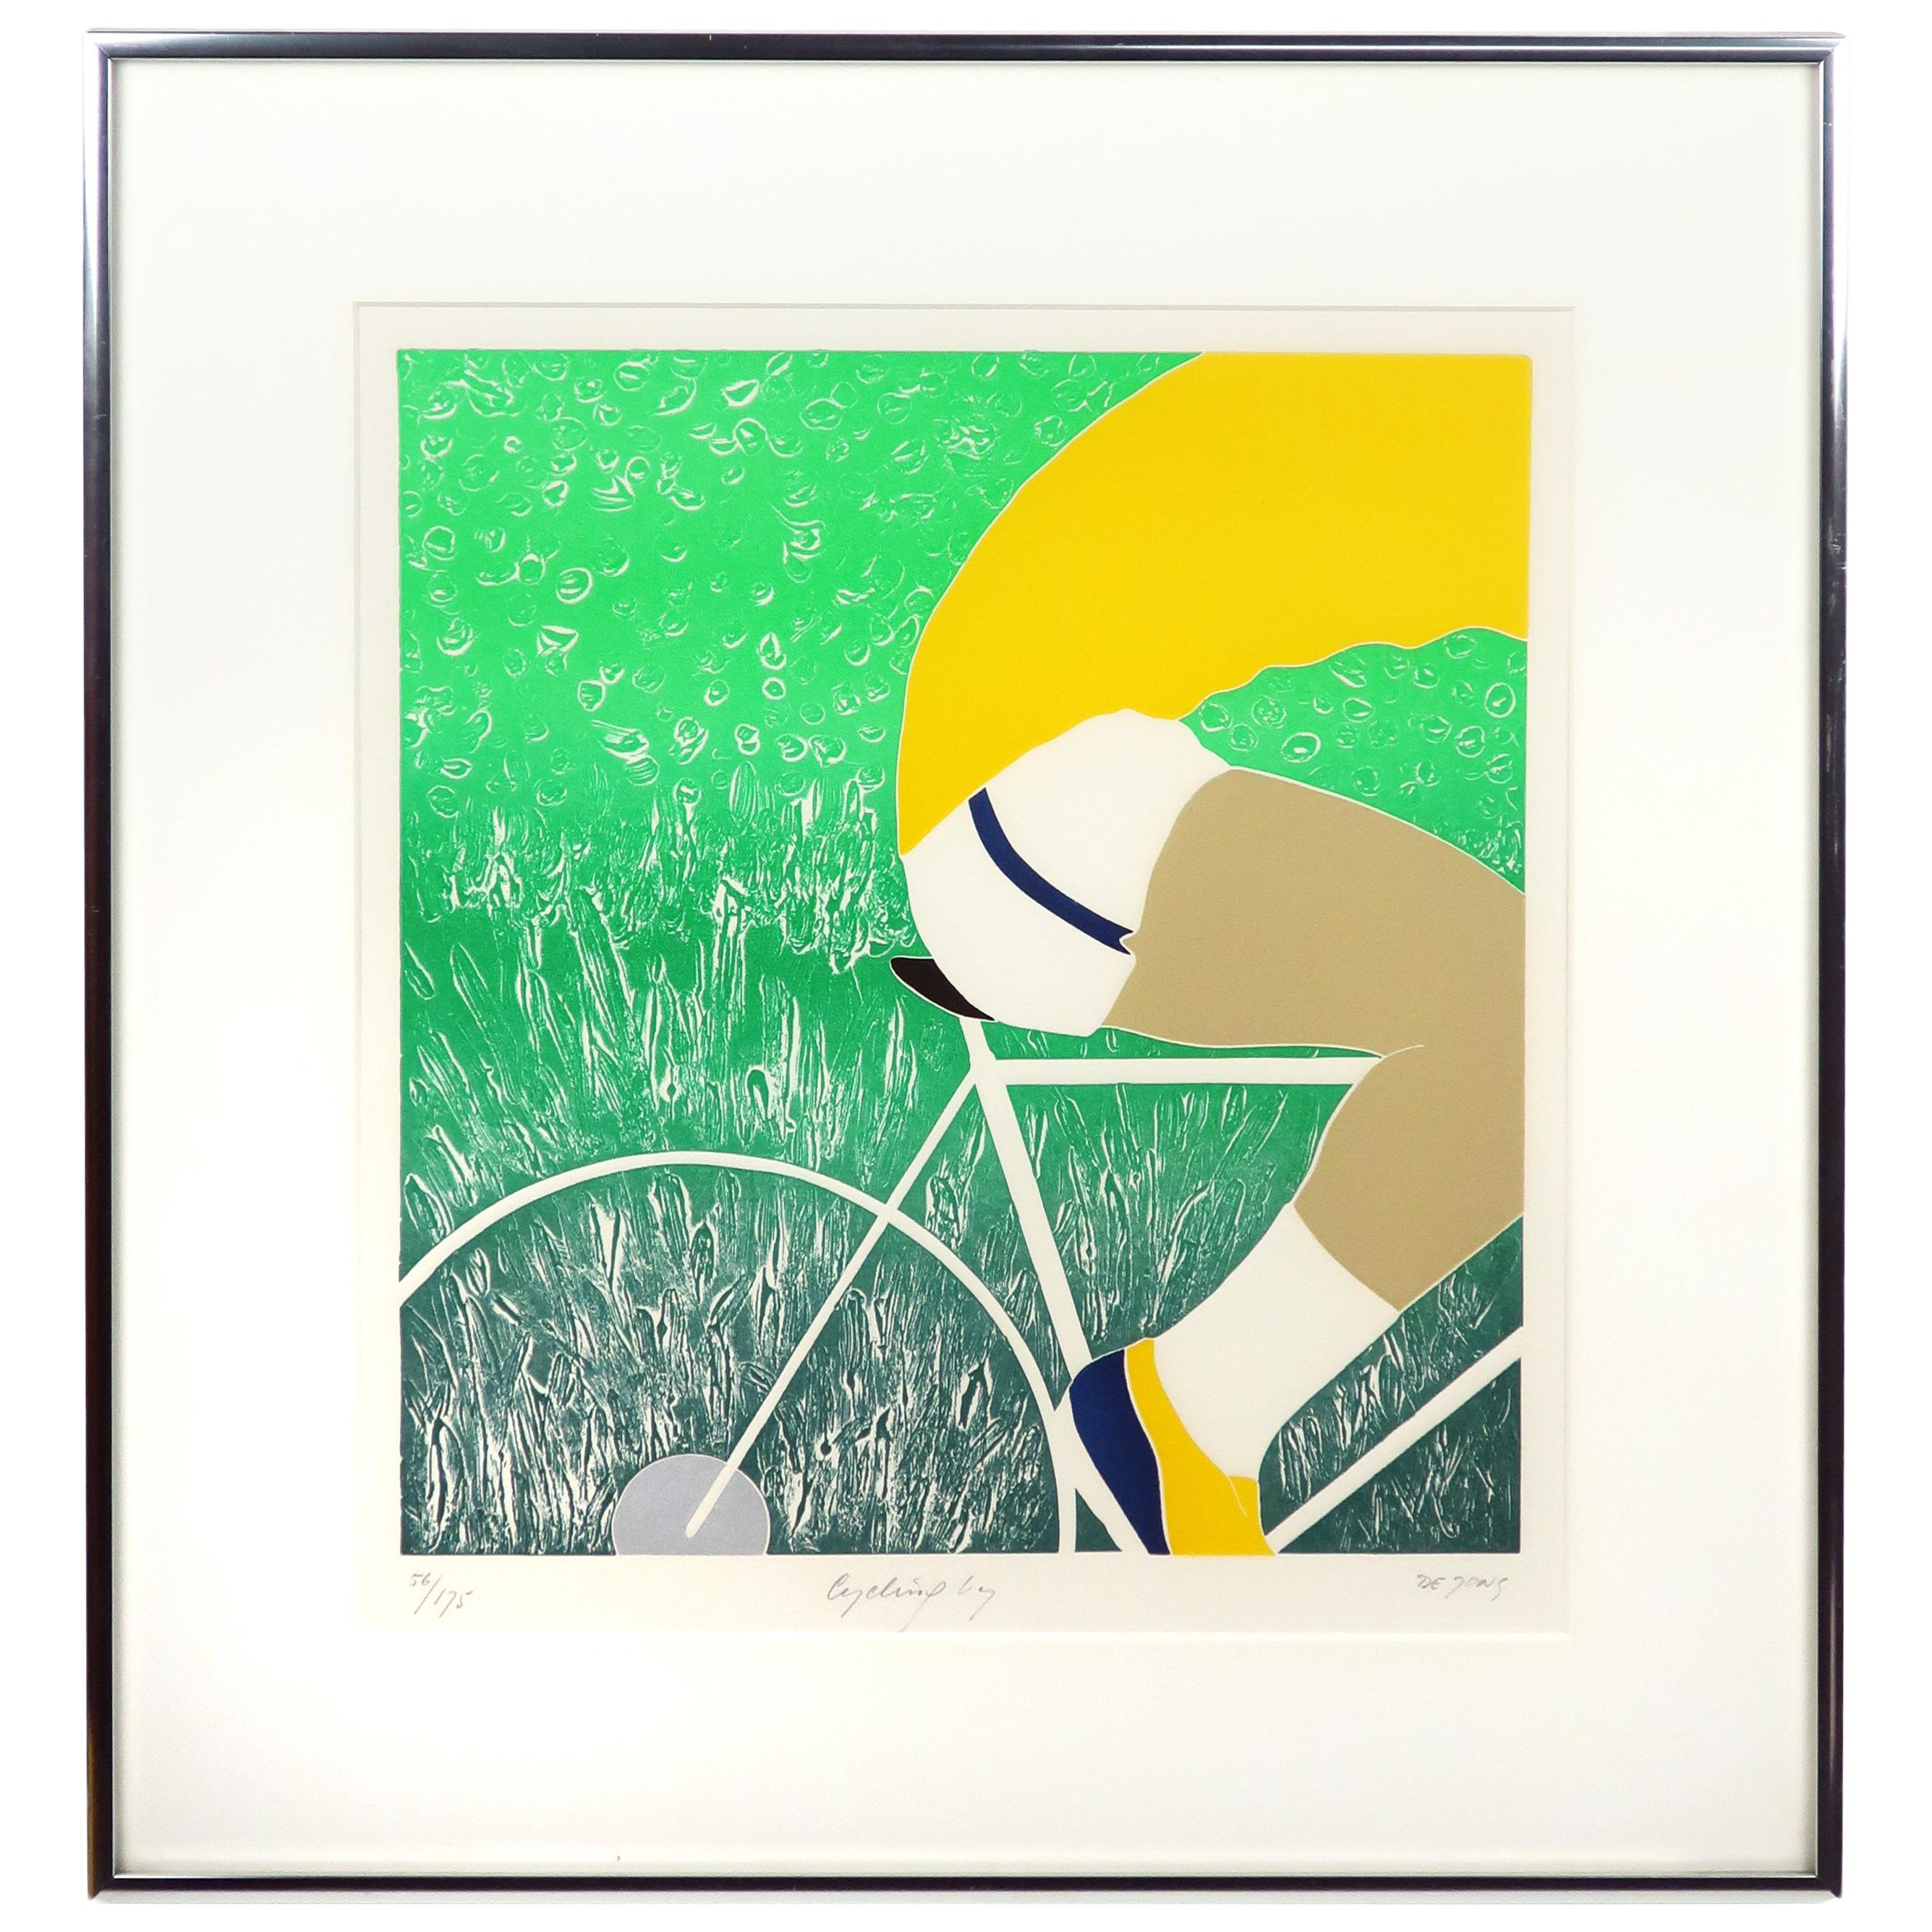 Framed "Cycling By" Thom De Jong Serigraph